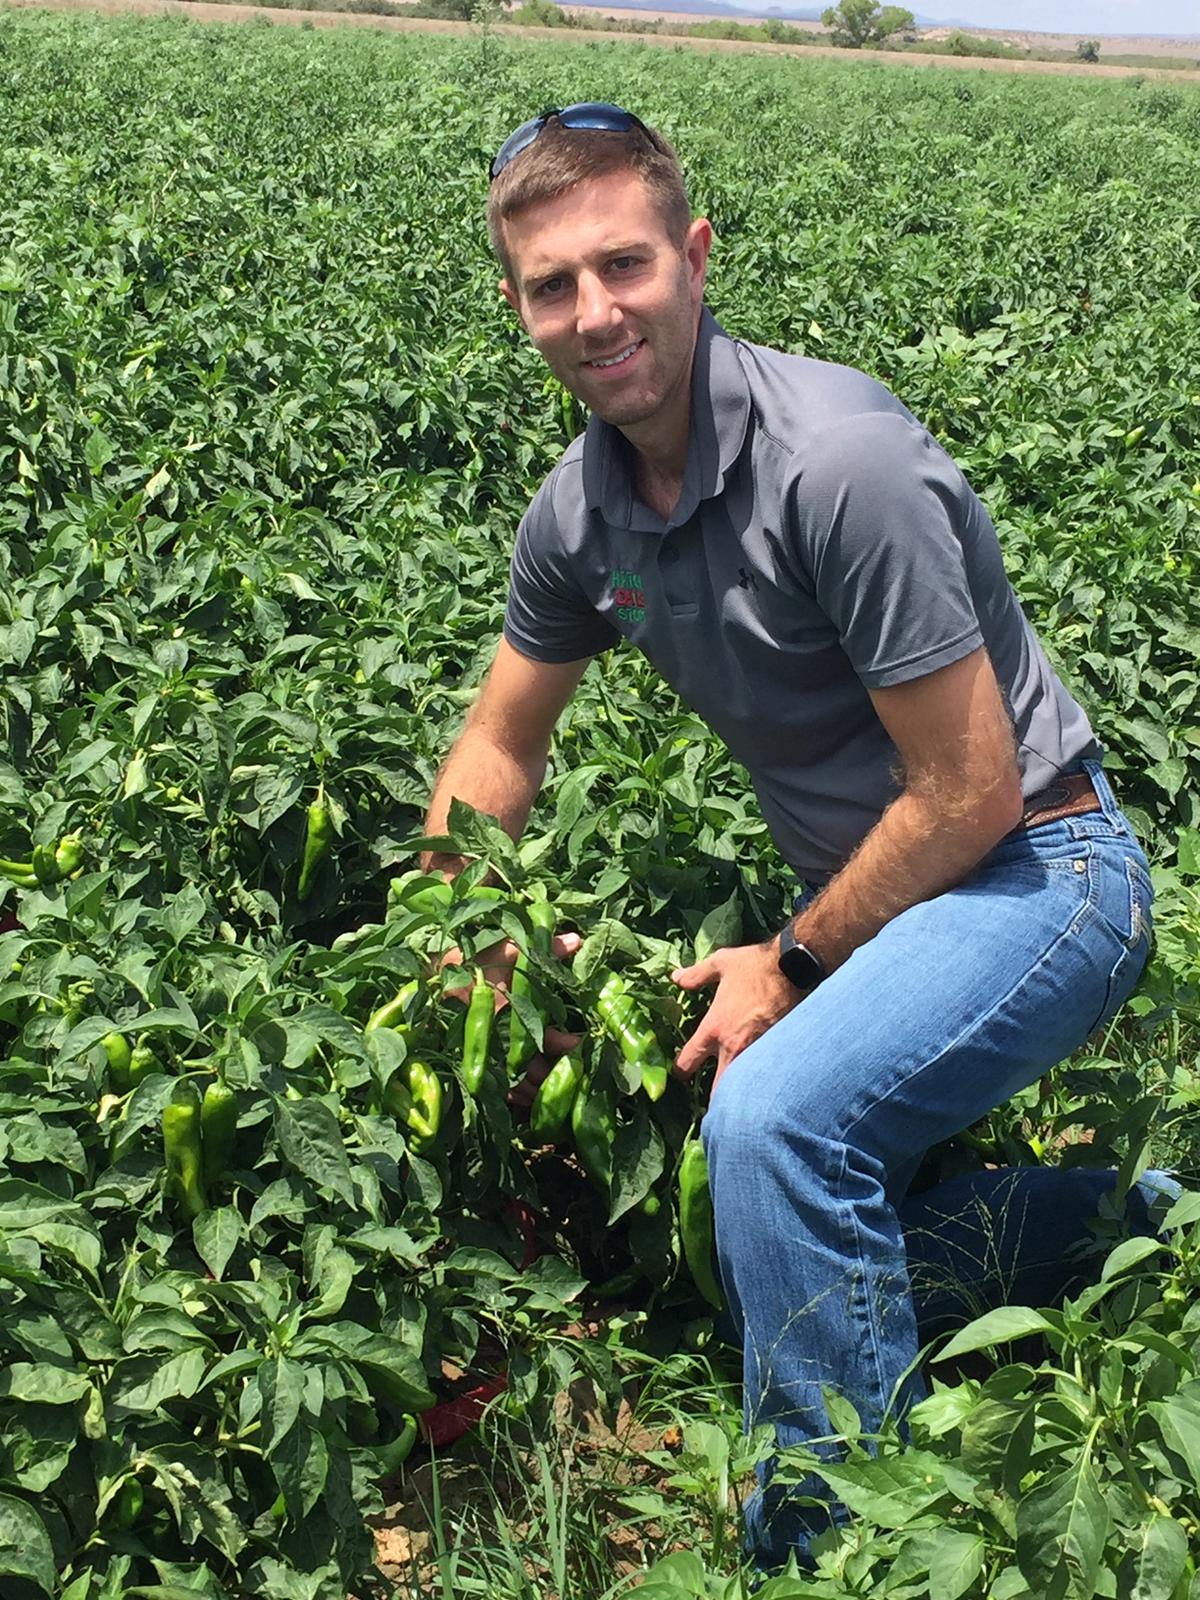 Preston Mitchell stands in a field of Charger chiles. His company, The Hatch Chile Store, ships Hatch chiles and chile products across the country and around the world. (Eric Lucas)